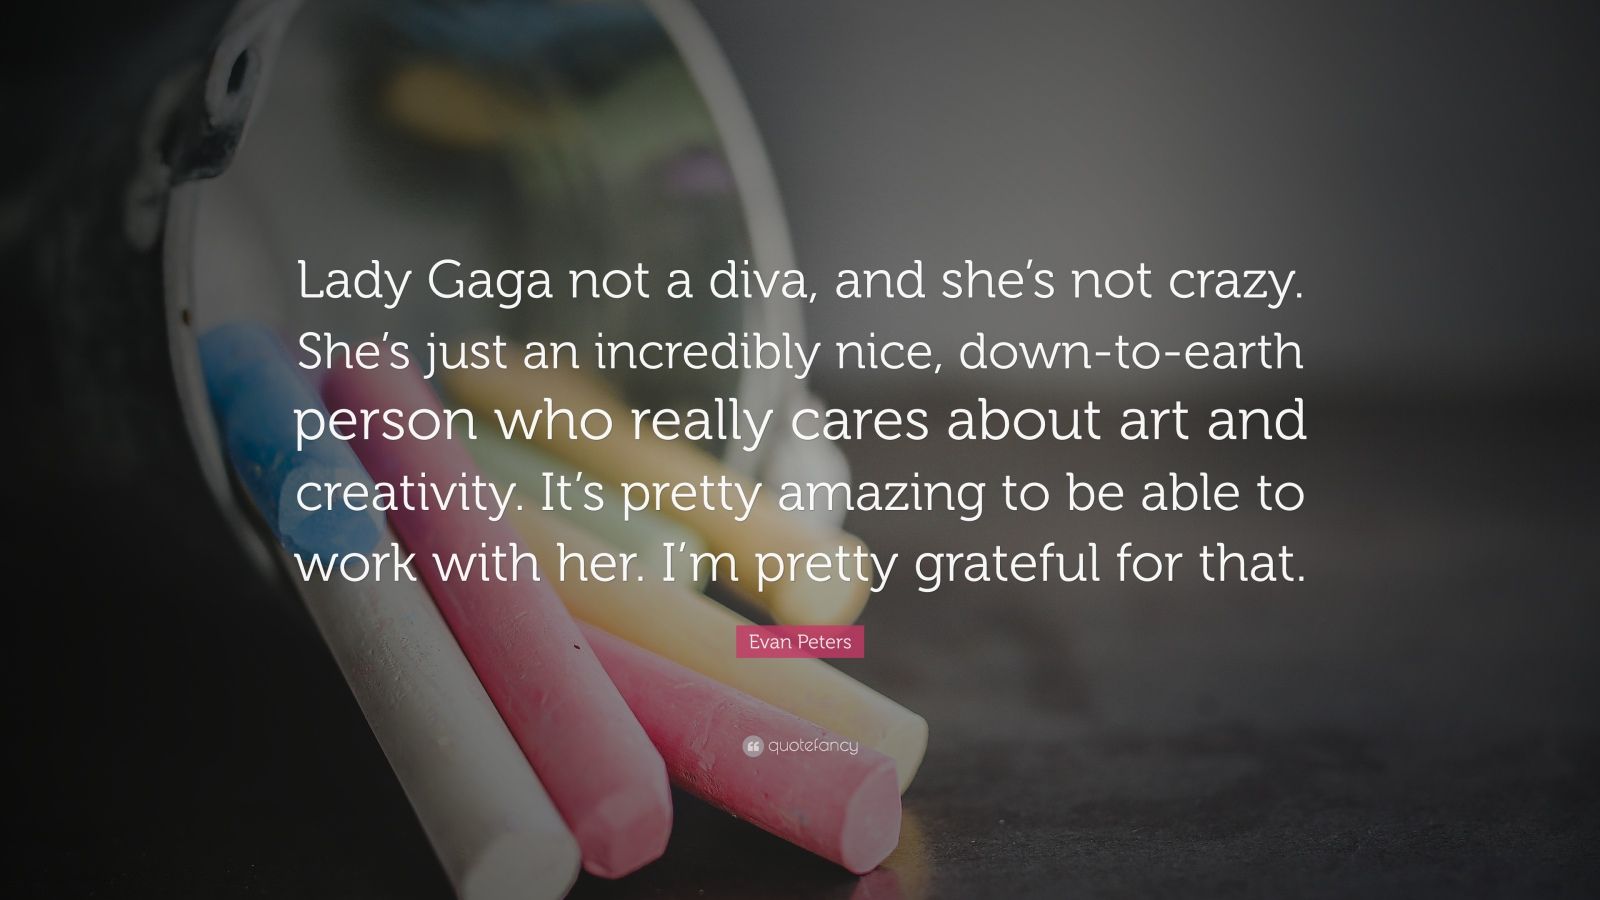 Evan Peters Quote: "Lady Gaga not a diva, and she's not crazy. She's just an incredibly nice ...